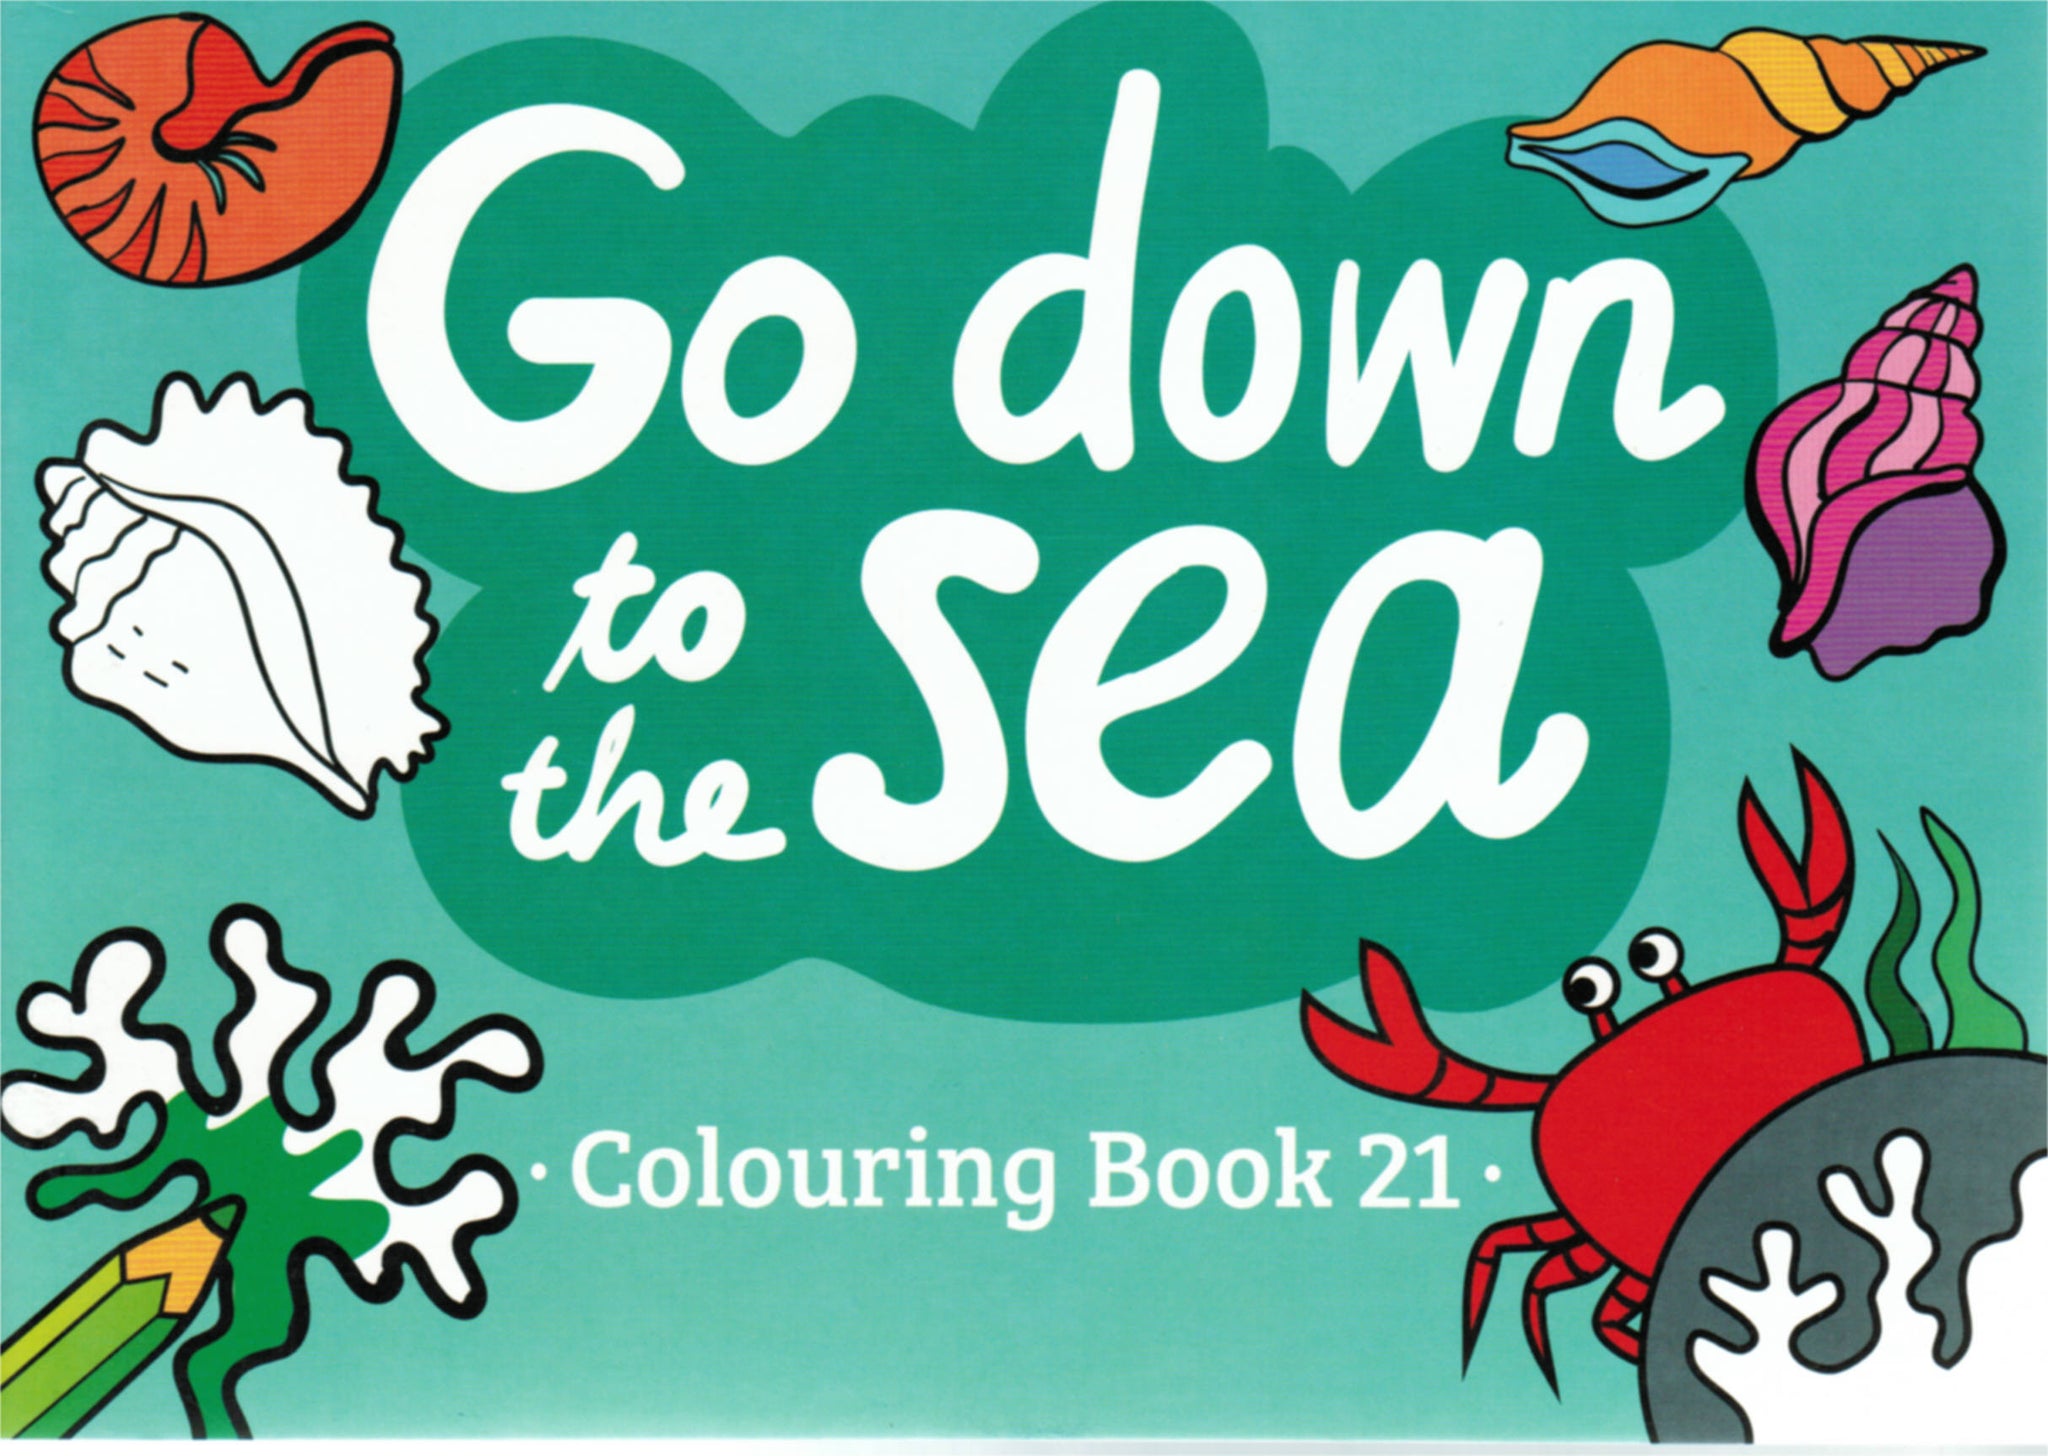 TBS Colouring Book 21 - Go Down to the Sea